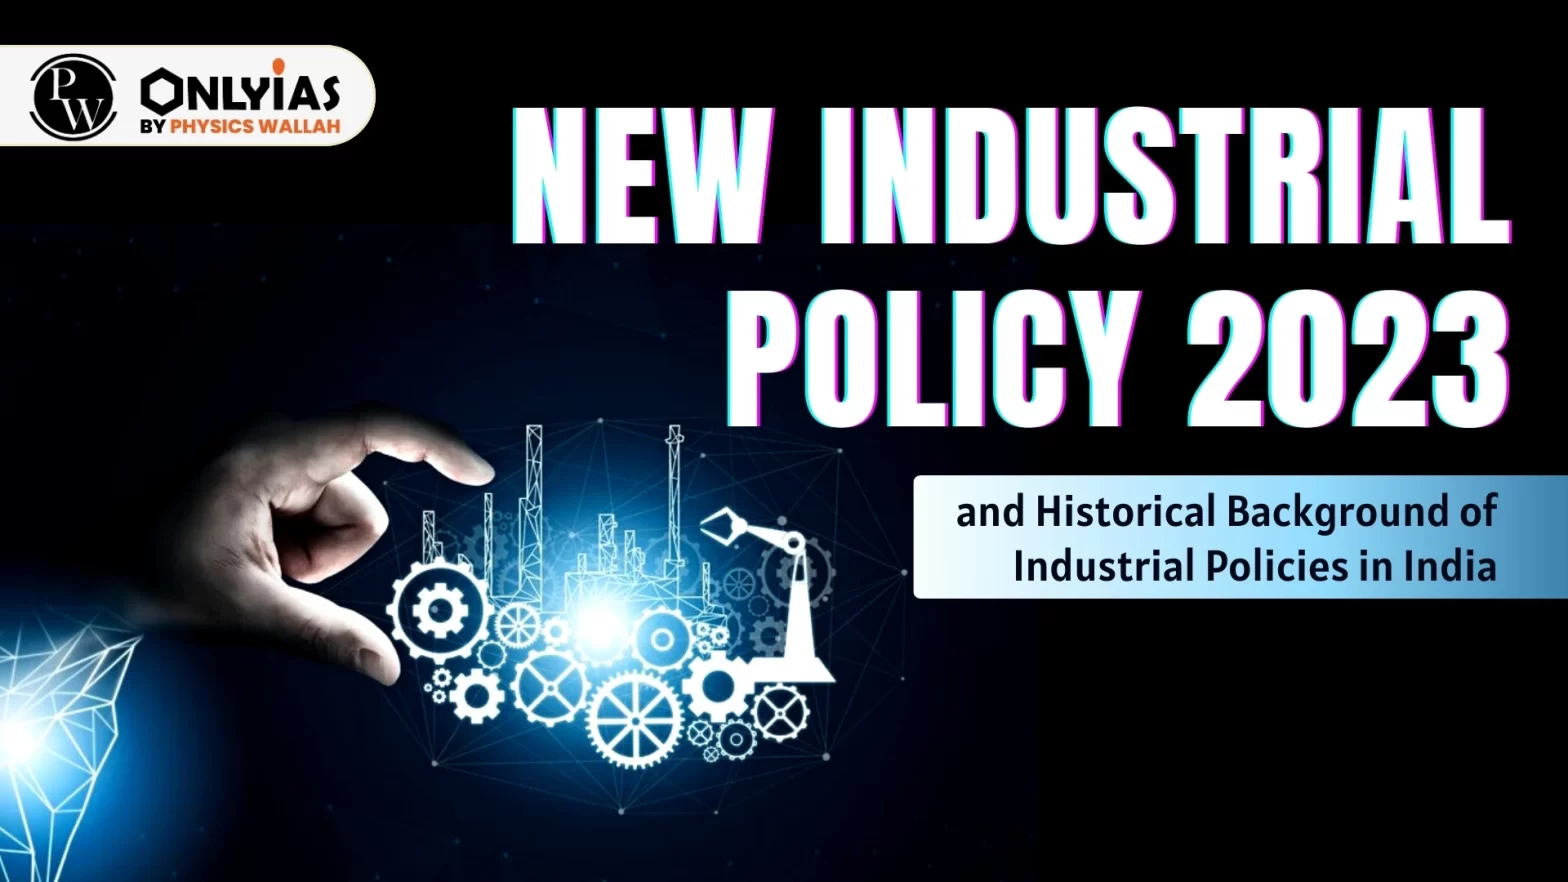 New Industrial Policy 2023, and Historical Background of Industrial Policies in India